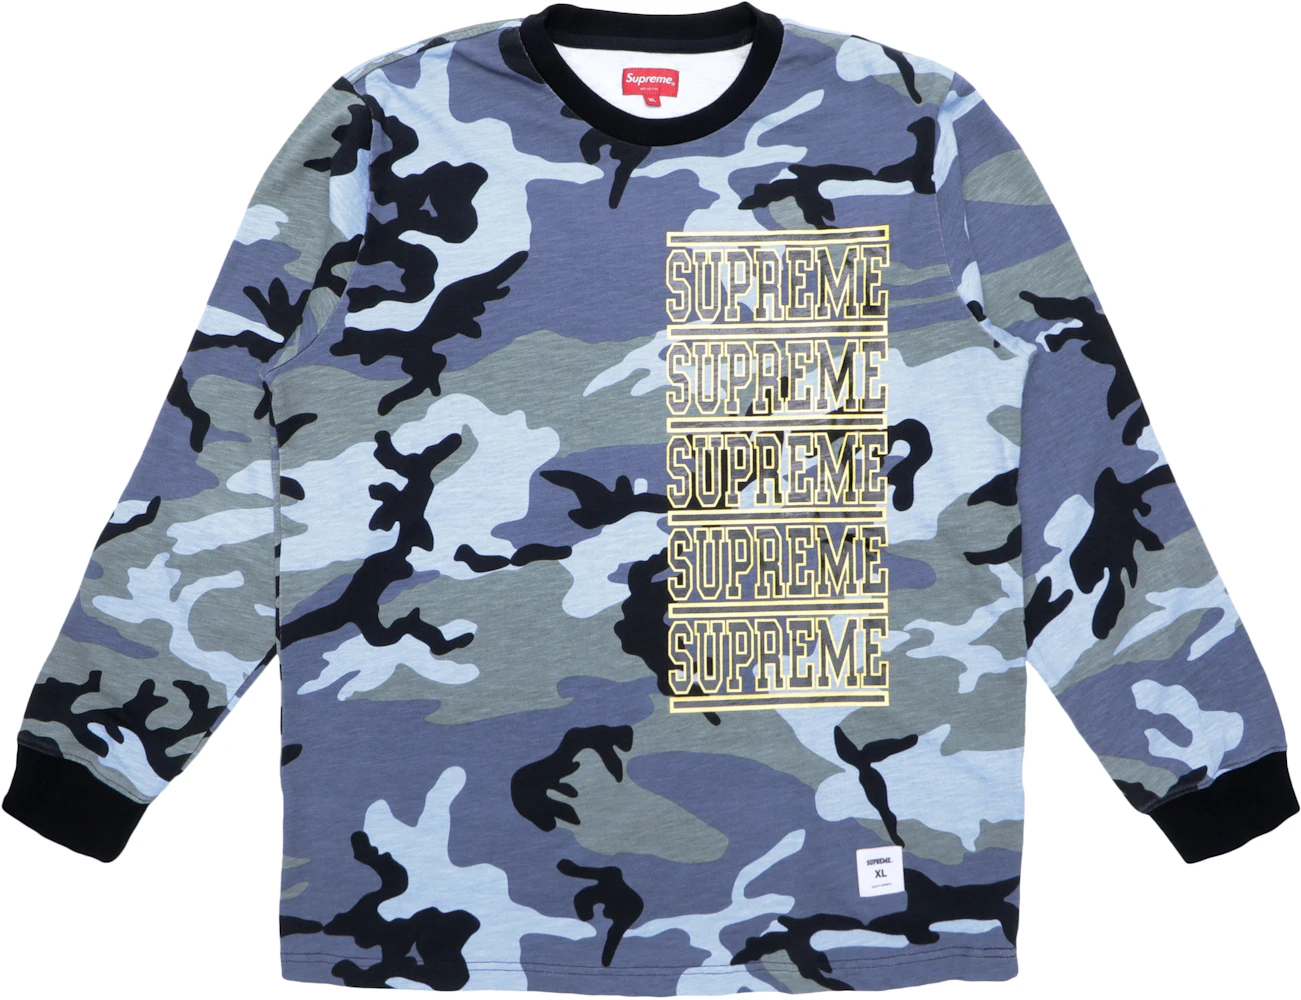 Supreme Stacked L/S Top Blue Camo Men's - SS18 - US